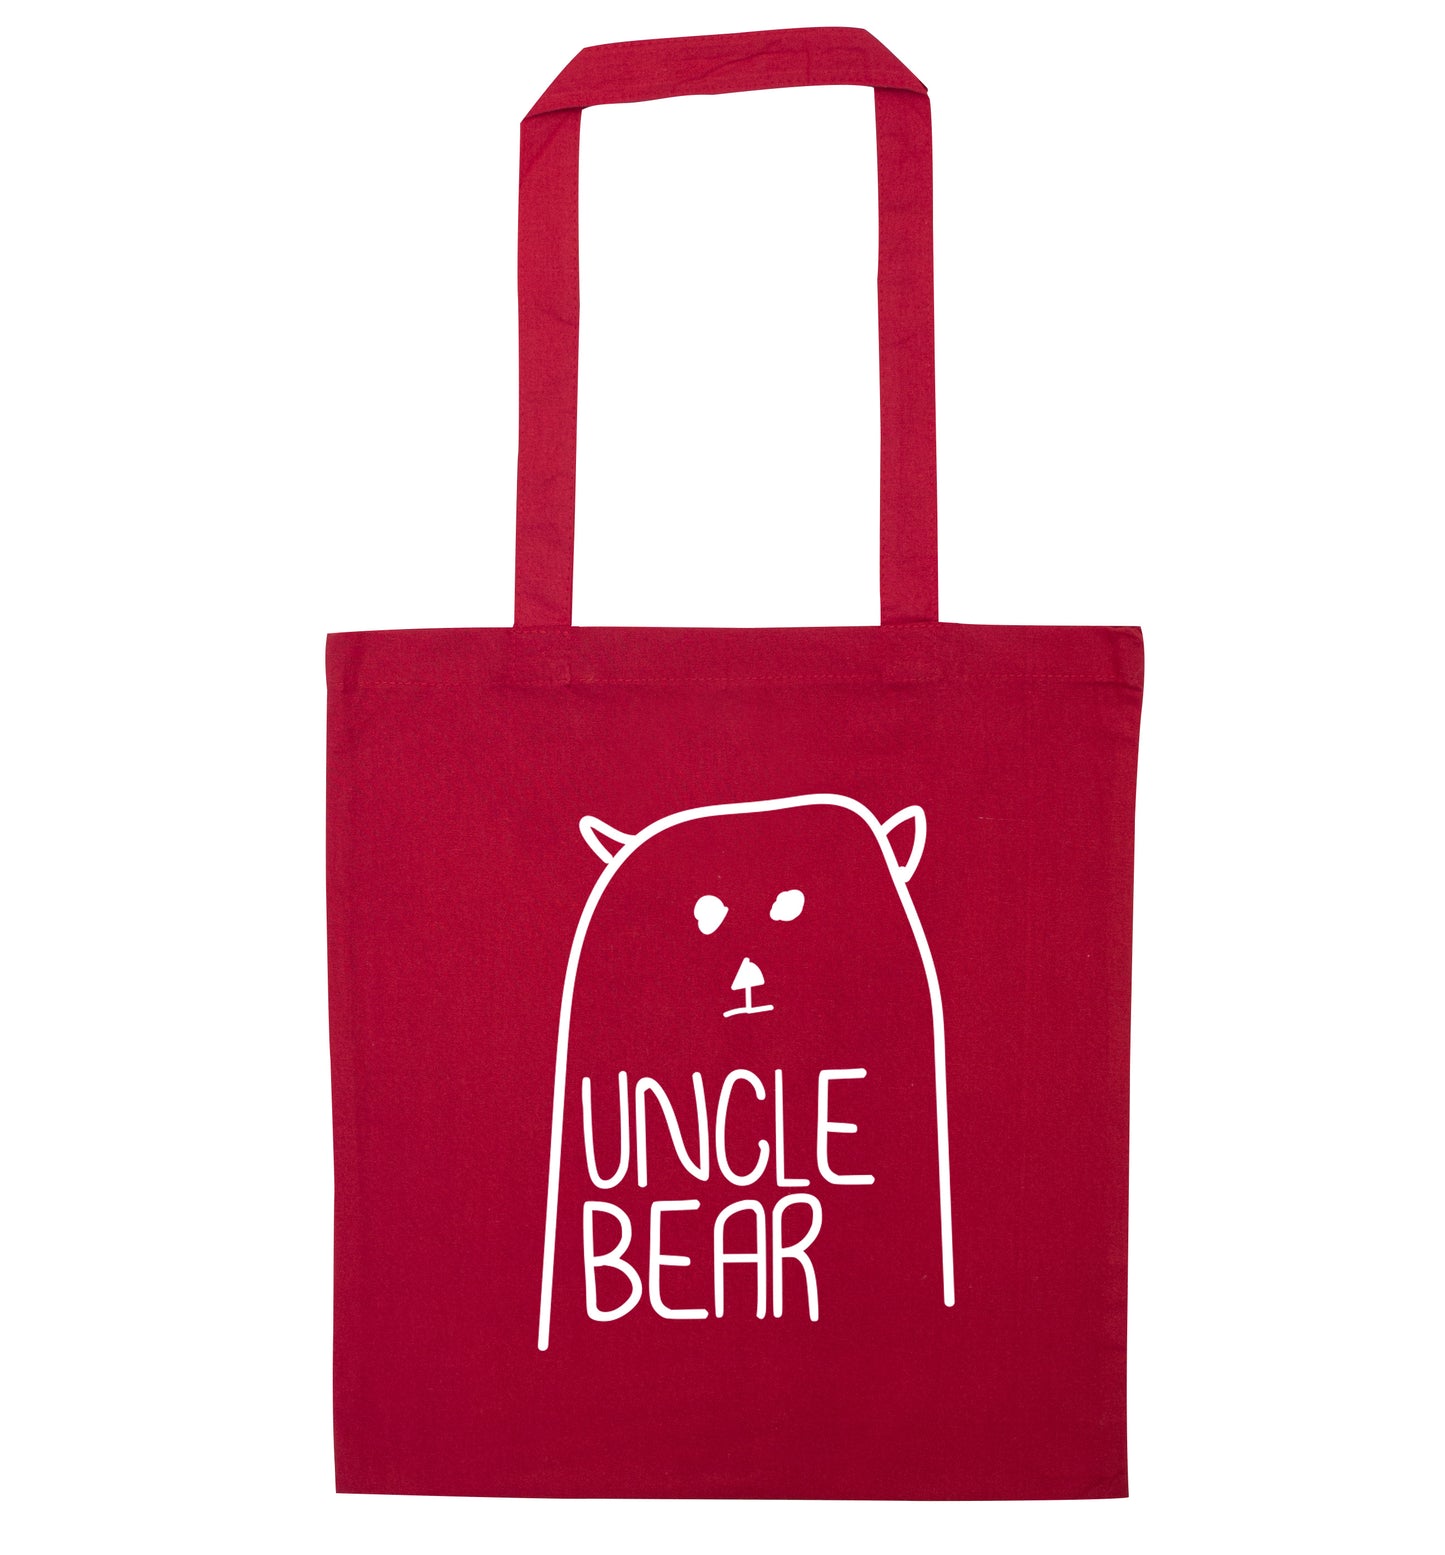 Uncle bear red tote bag